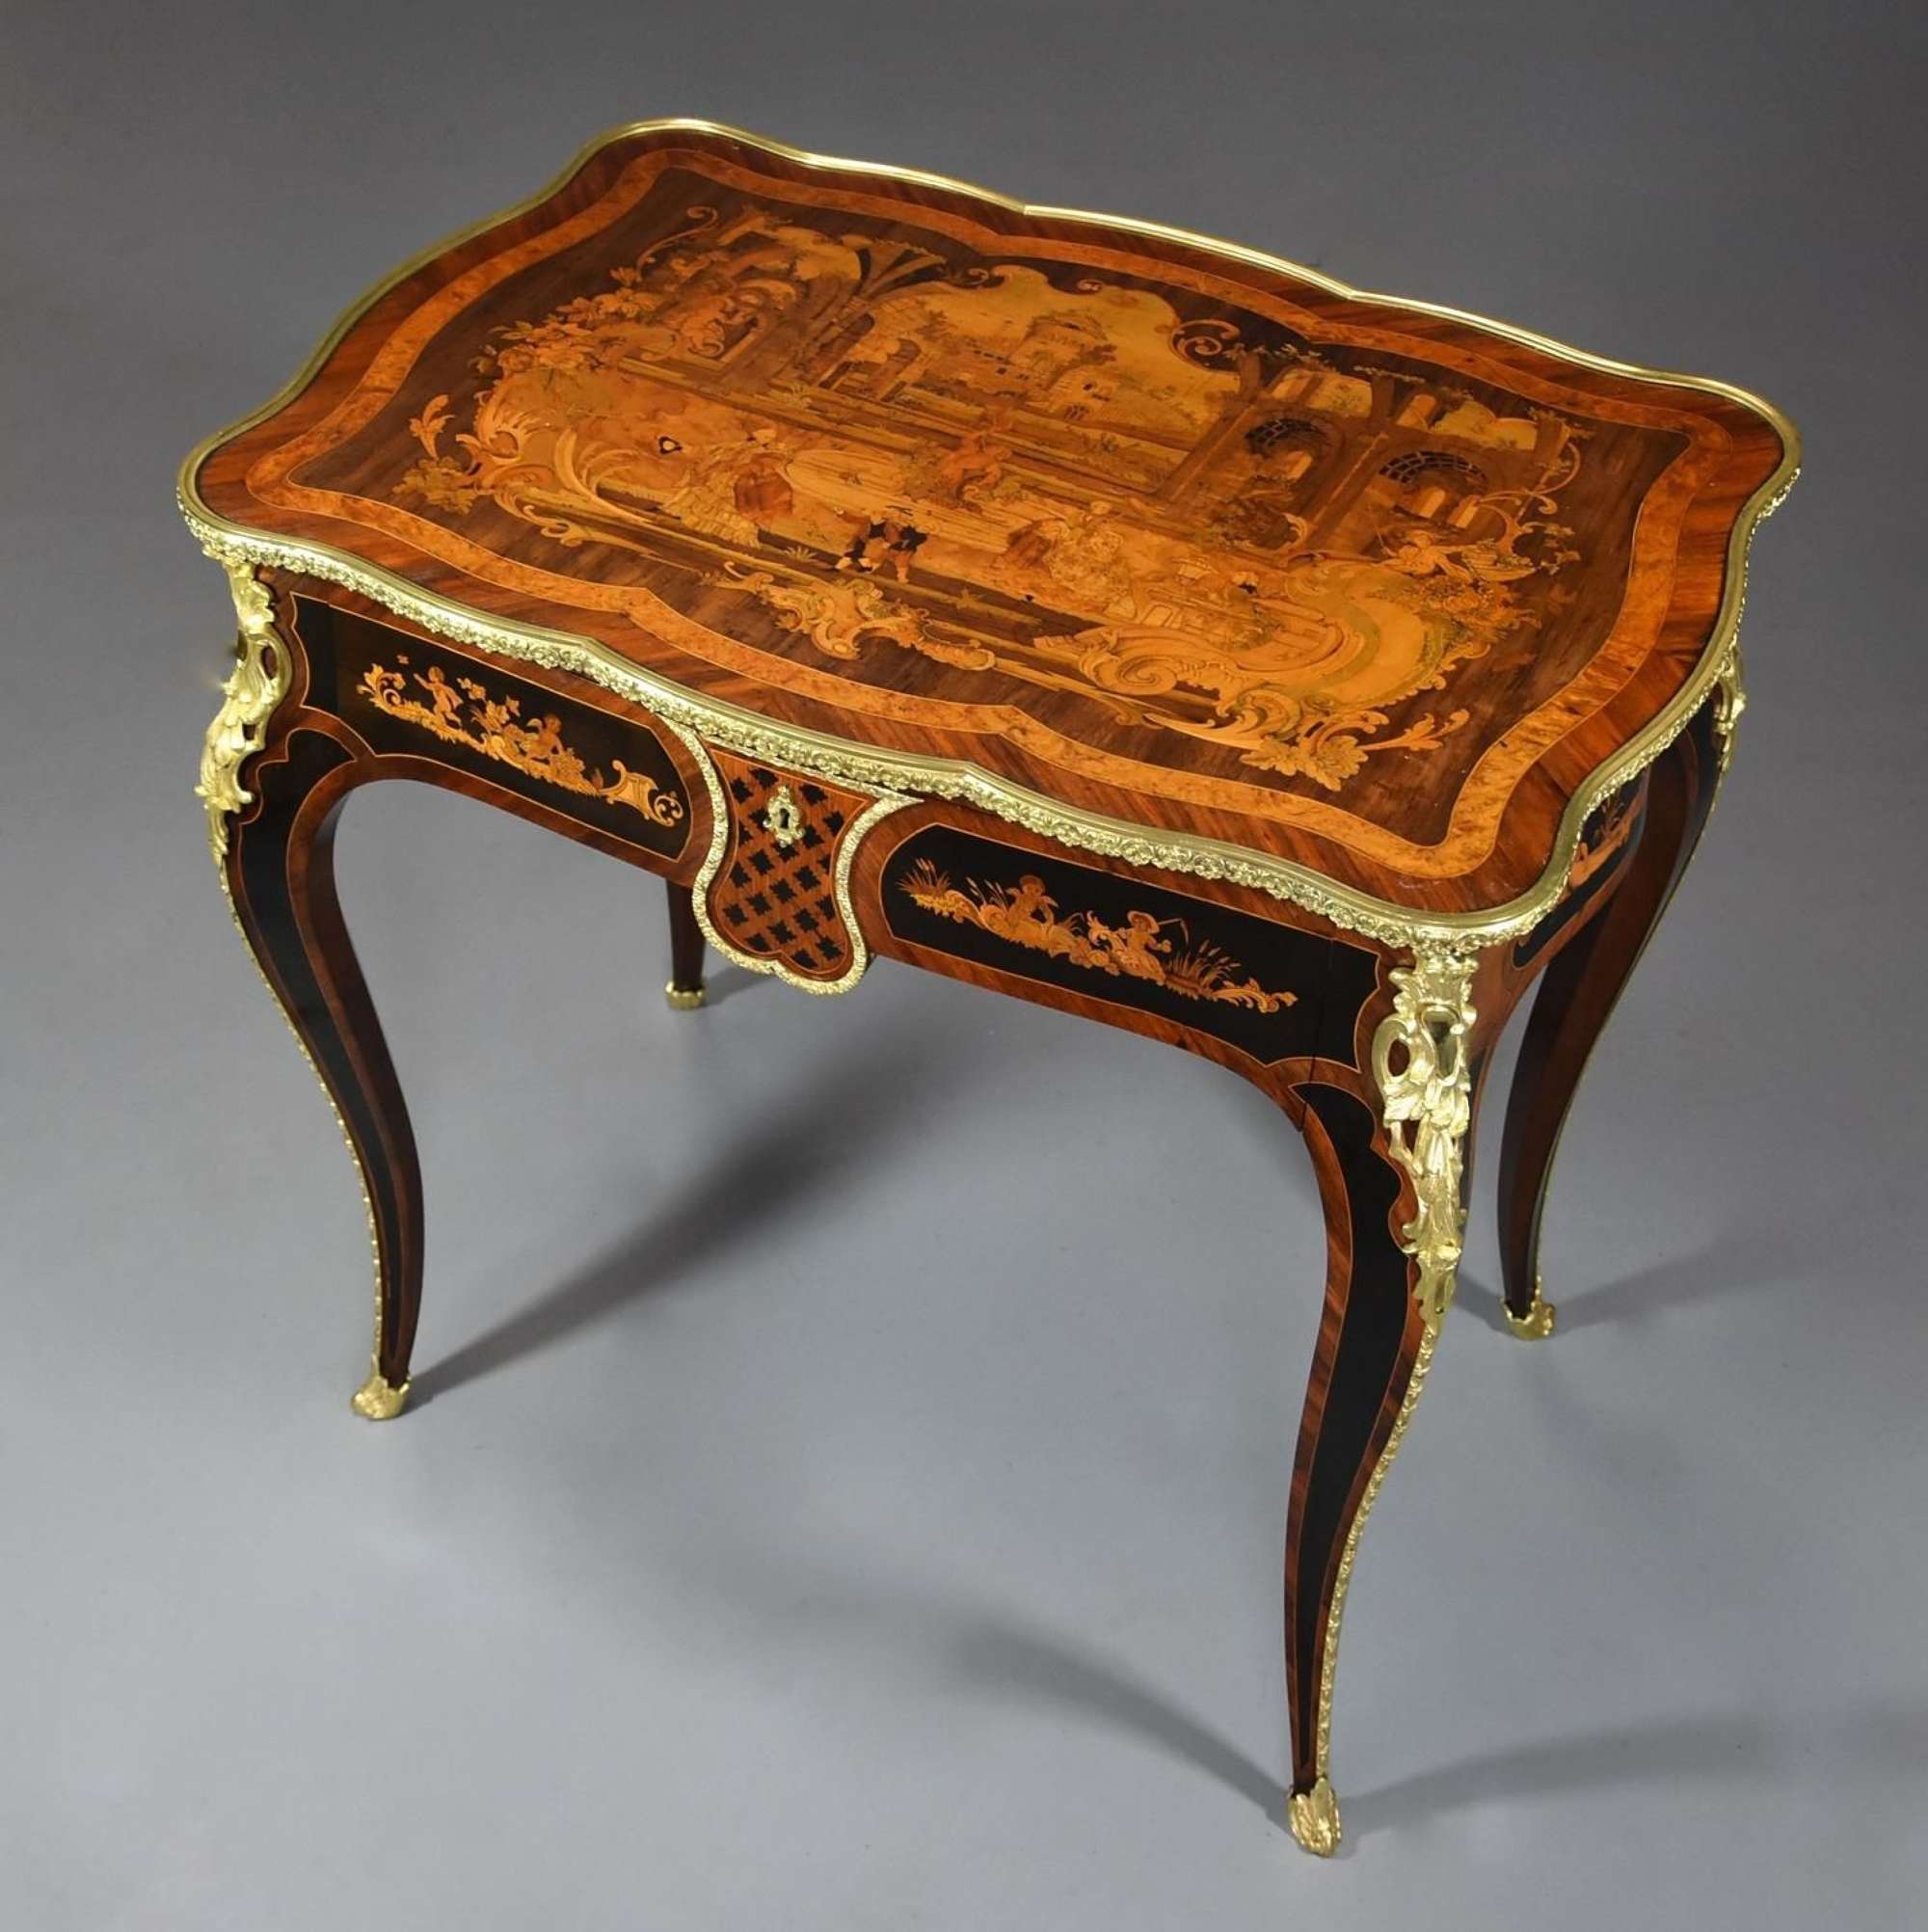 Fine quality mid 19th century French Kingwood inlaid centre table